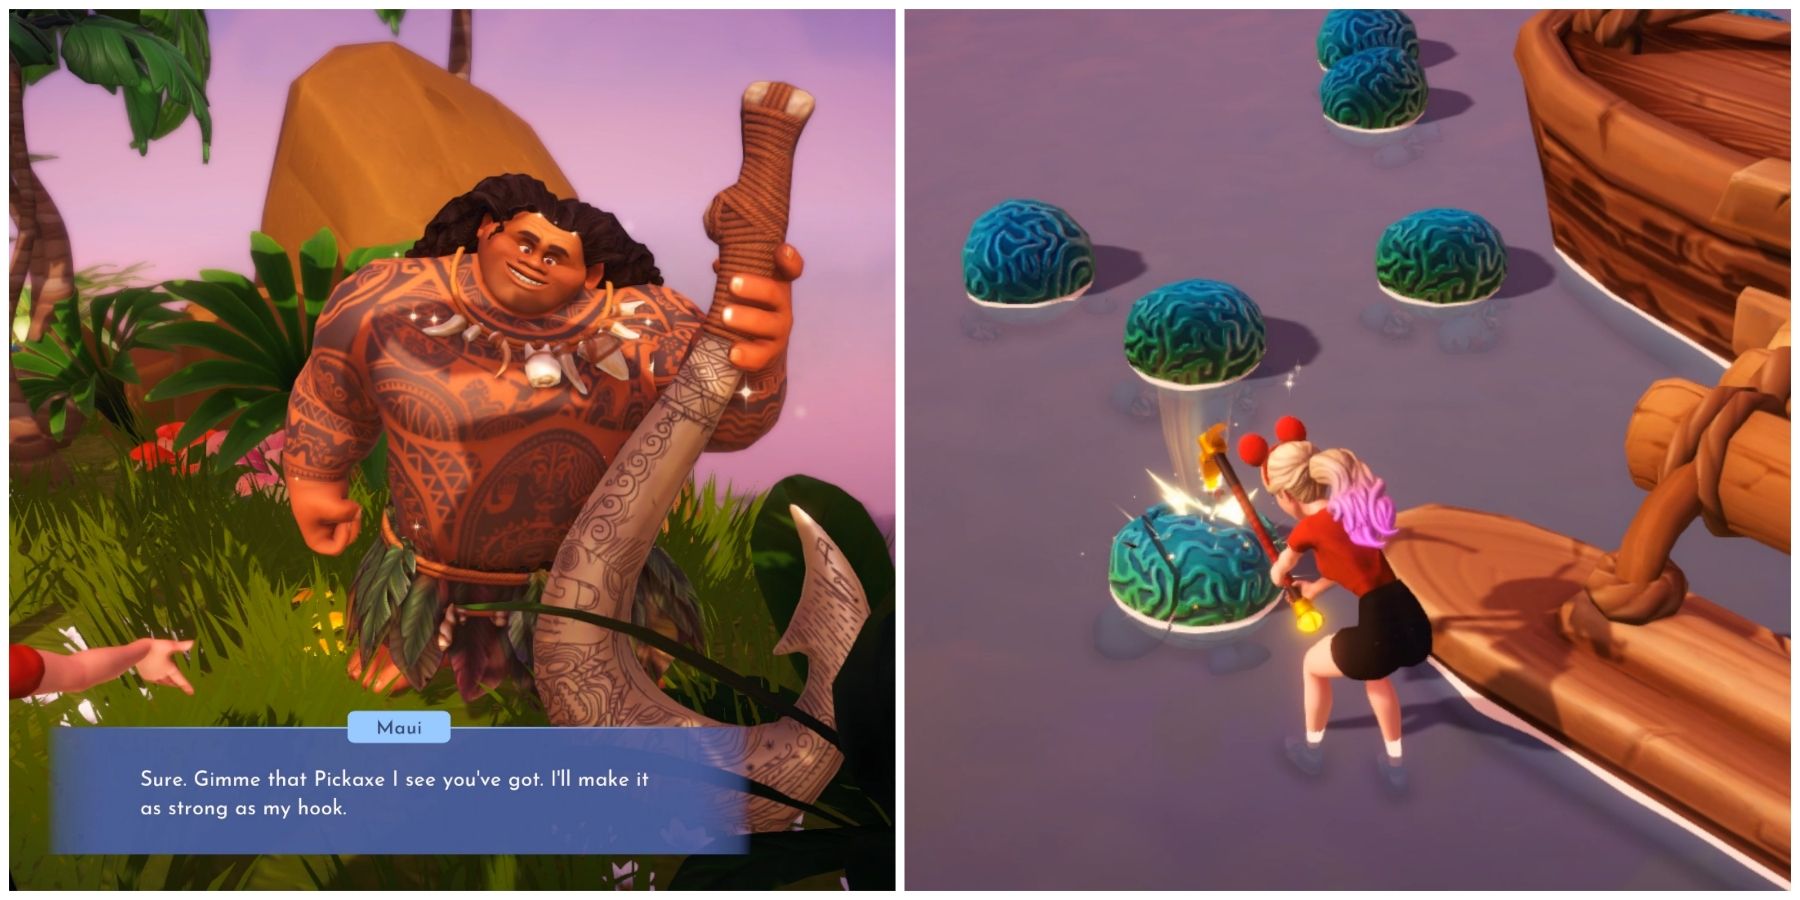 maui upgrading the pickaxe in disney dreamlight valley